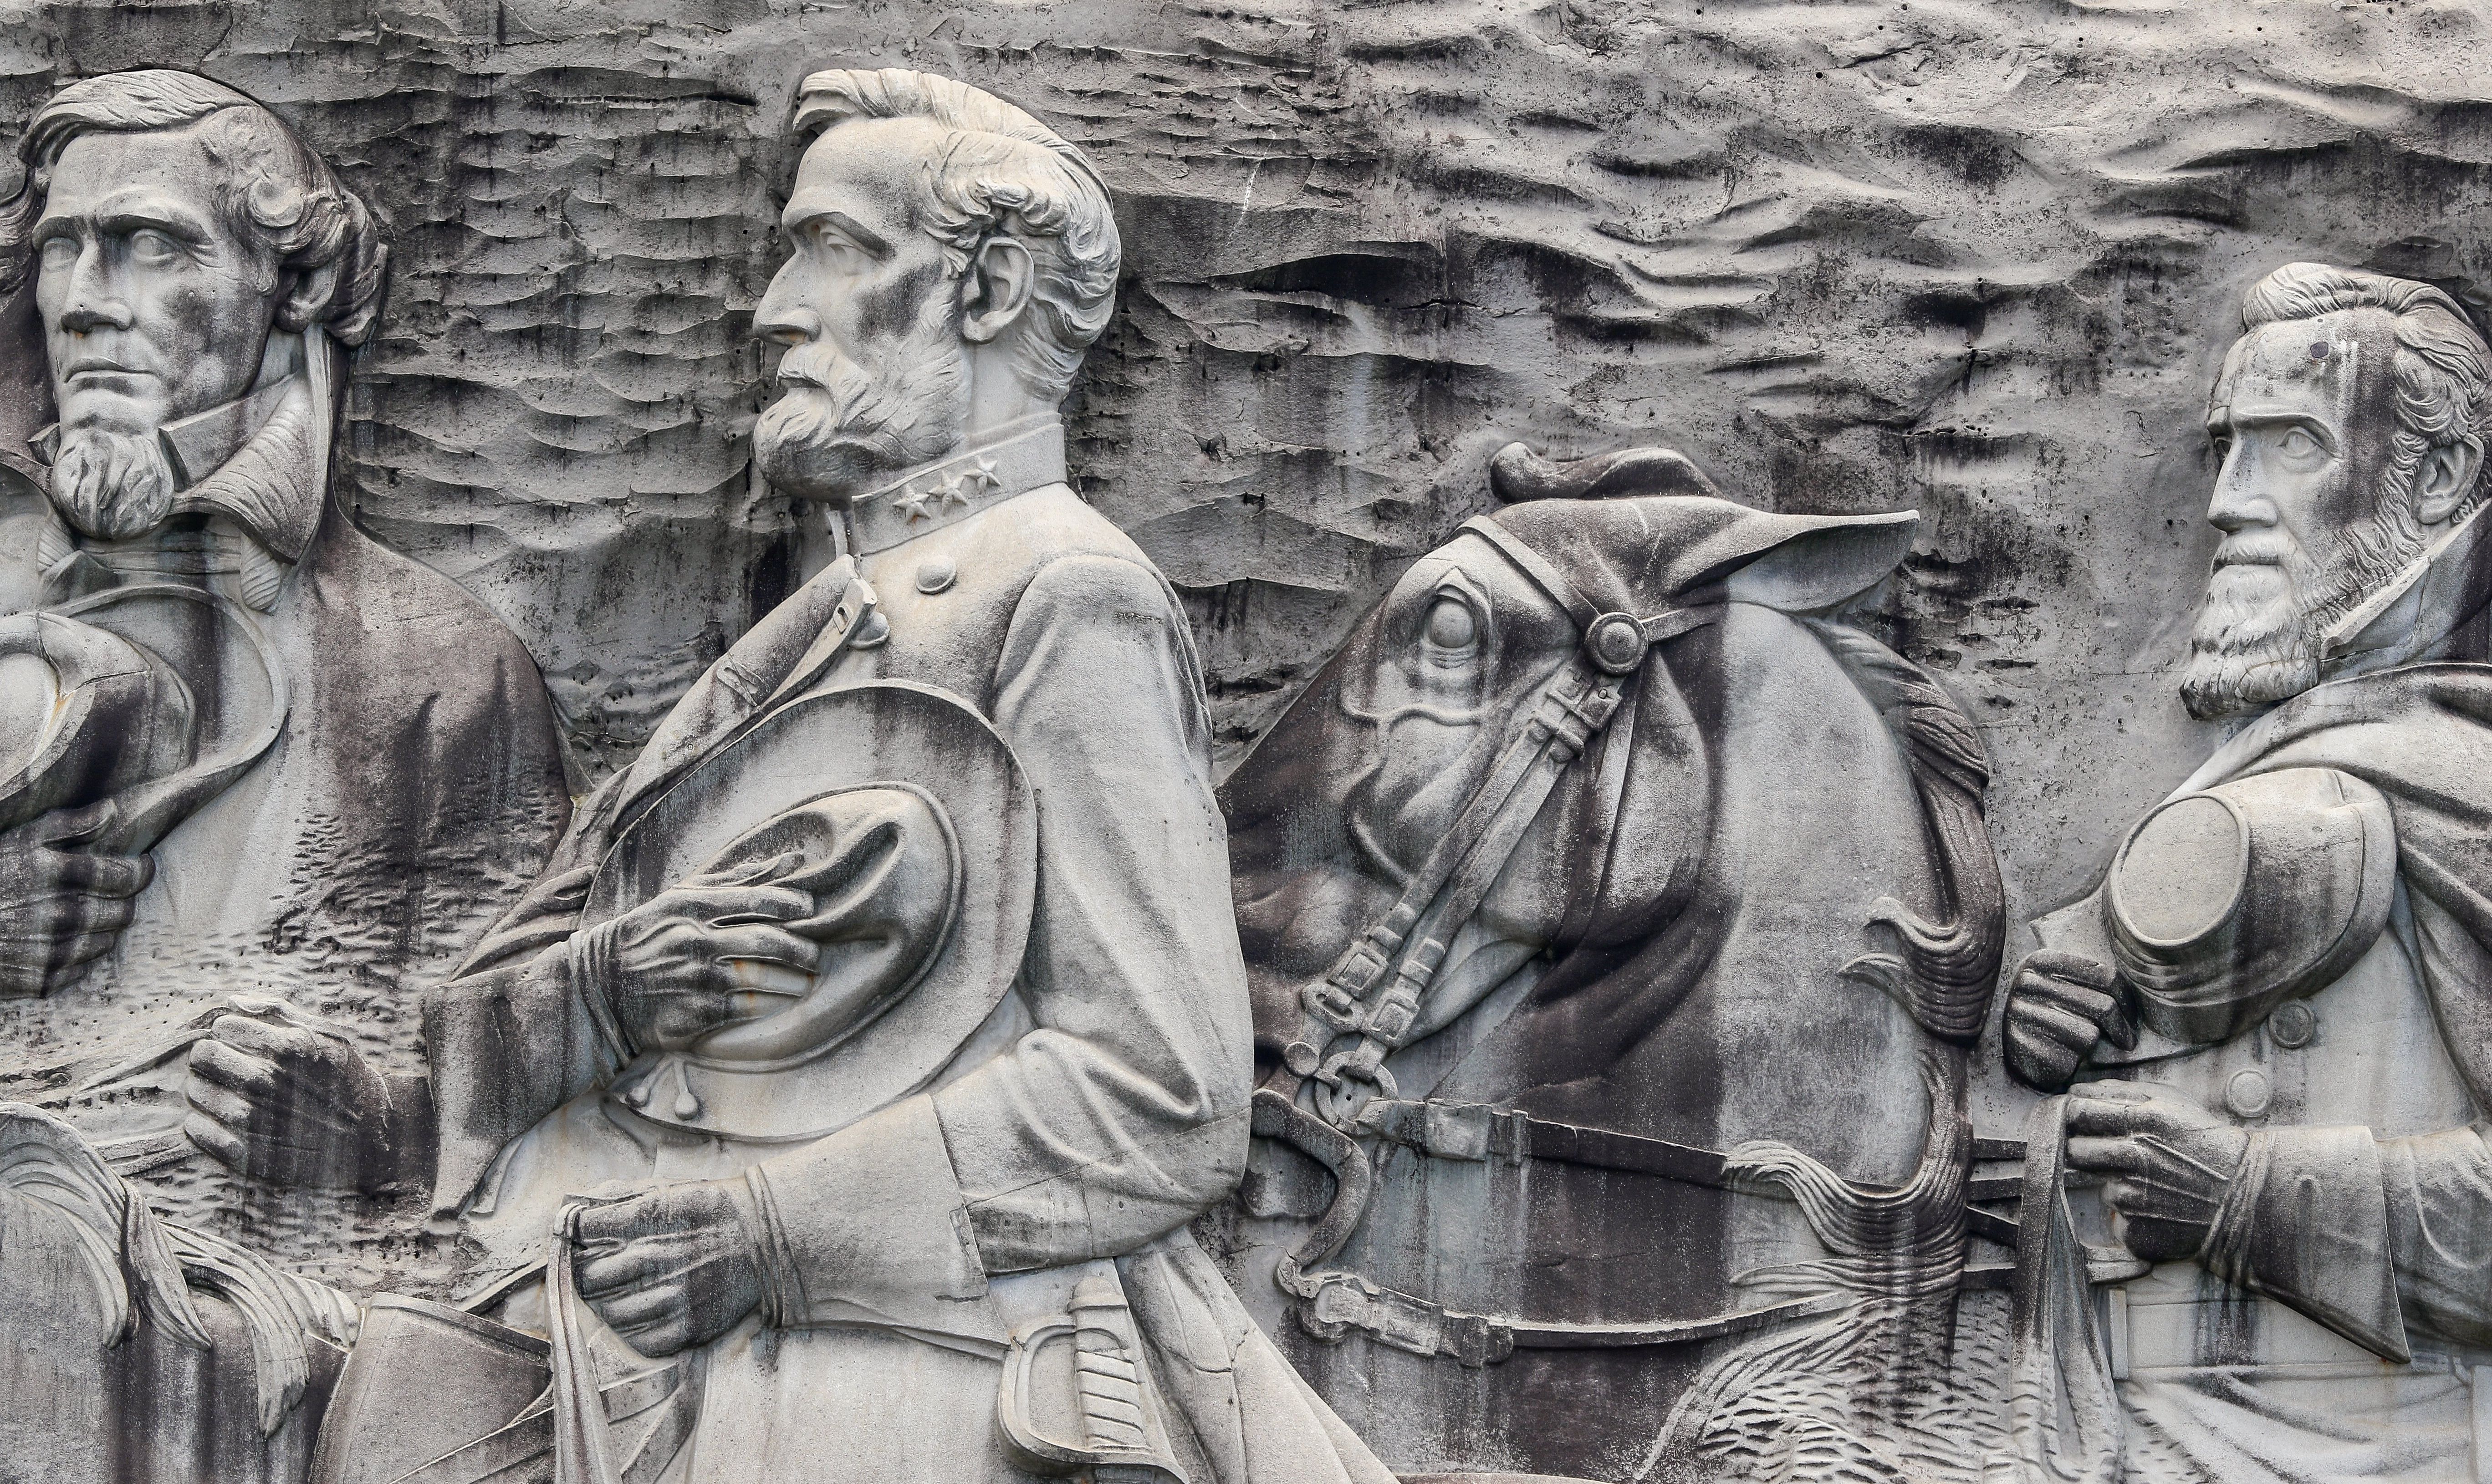 epa06150541 The Confederate Memorial Carving, depicting three Confederate figures of the US Civil War, President Jefferson Davis (L), General Robert E. Lee (C) and Thomas J. 'Stonewall' Jackson (R), on Stone Mountain in Stone Mountain, Georgia, USA, 18 August 2017. Activists have renewed calls for the removal of Confederate and US Civil War memorials after the violence in Charlottesville, Virginia, including Georgia Democratic gubernatorial candidate Stacy Abrams.  EPA/ERIK S. LESSER